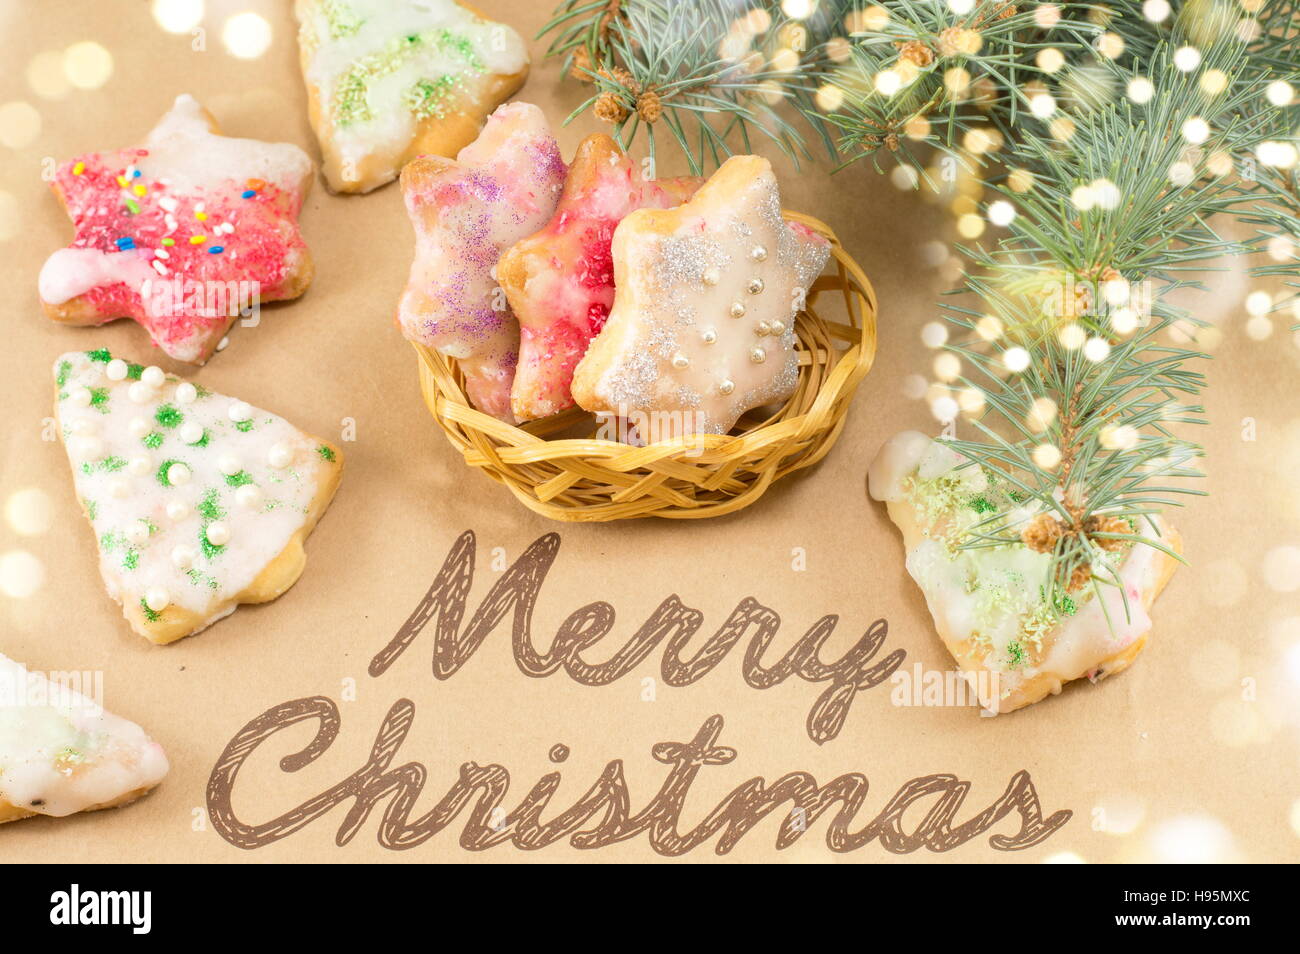 Merry Christmas card with decorated cookies and treats Stock Photo